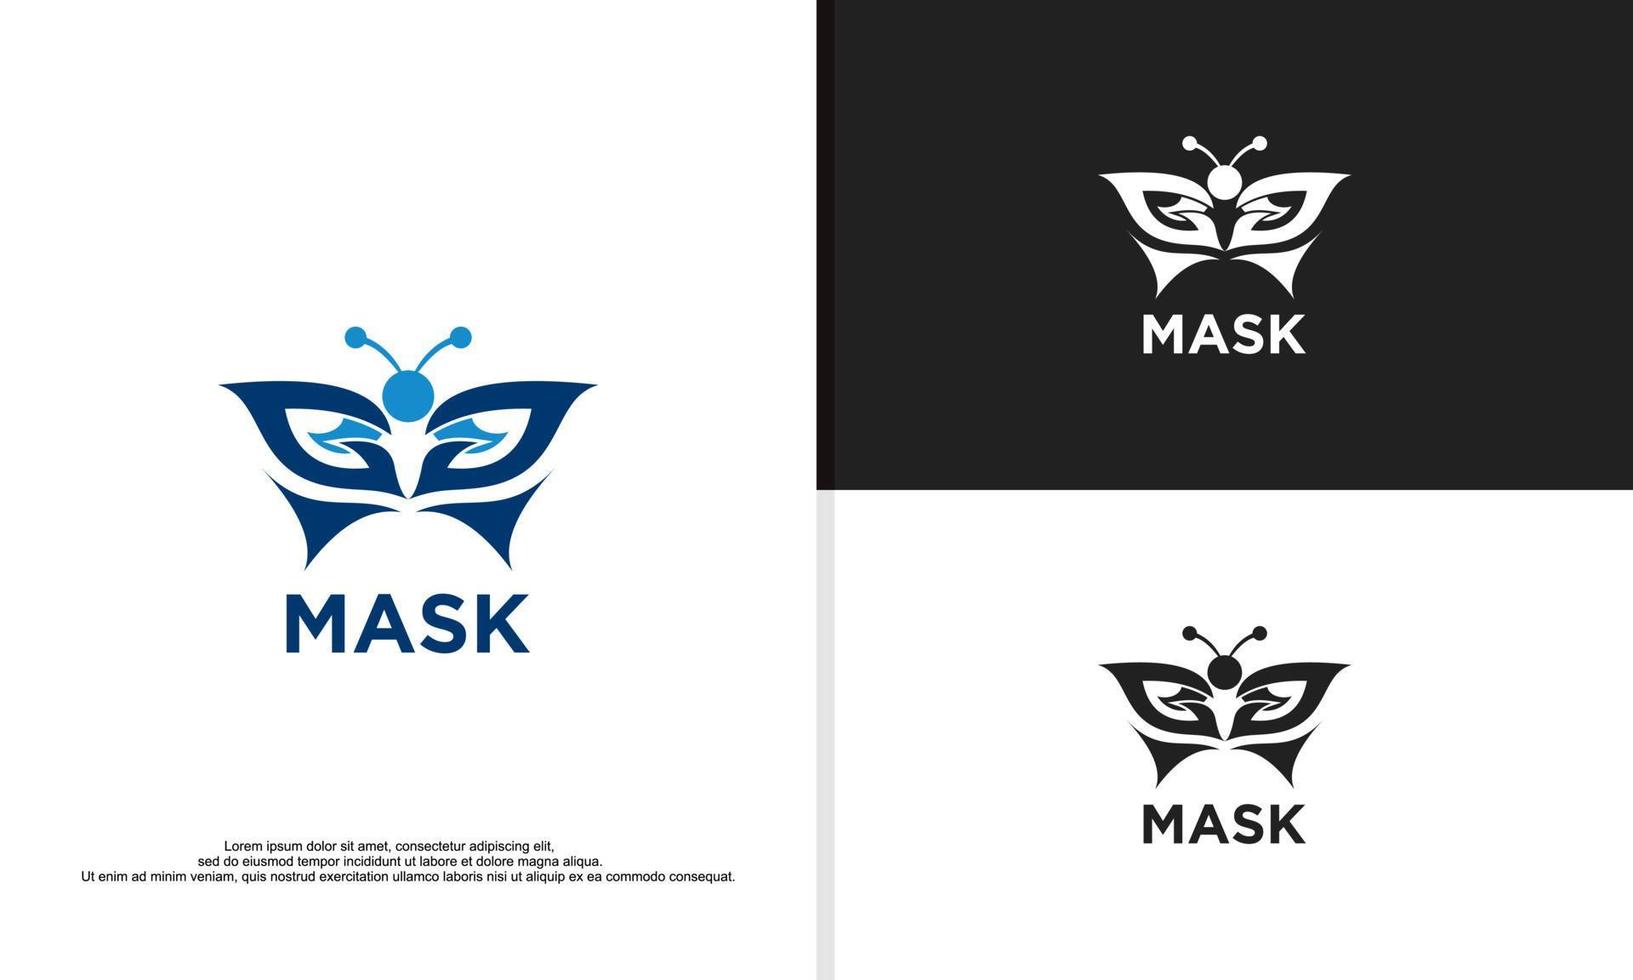 logo illustration vector graphic of butterfly combined with mask, fit for beauty companies, etc.